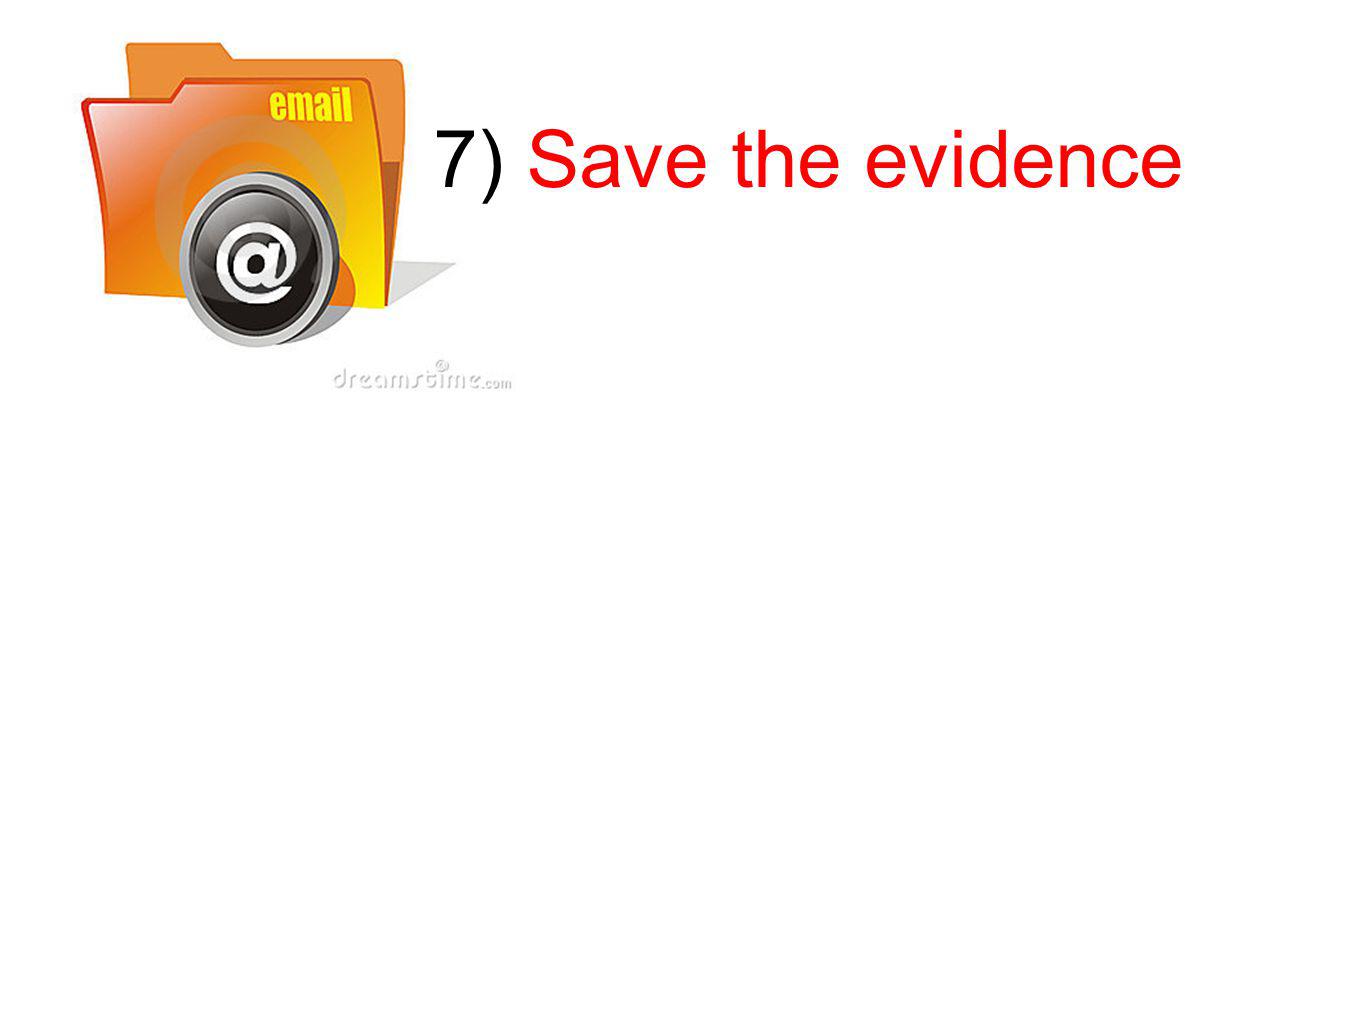 7) Save the evidence